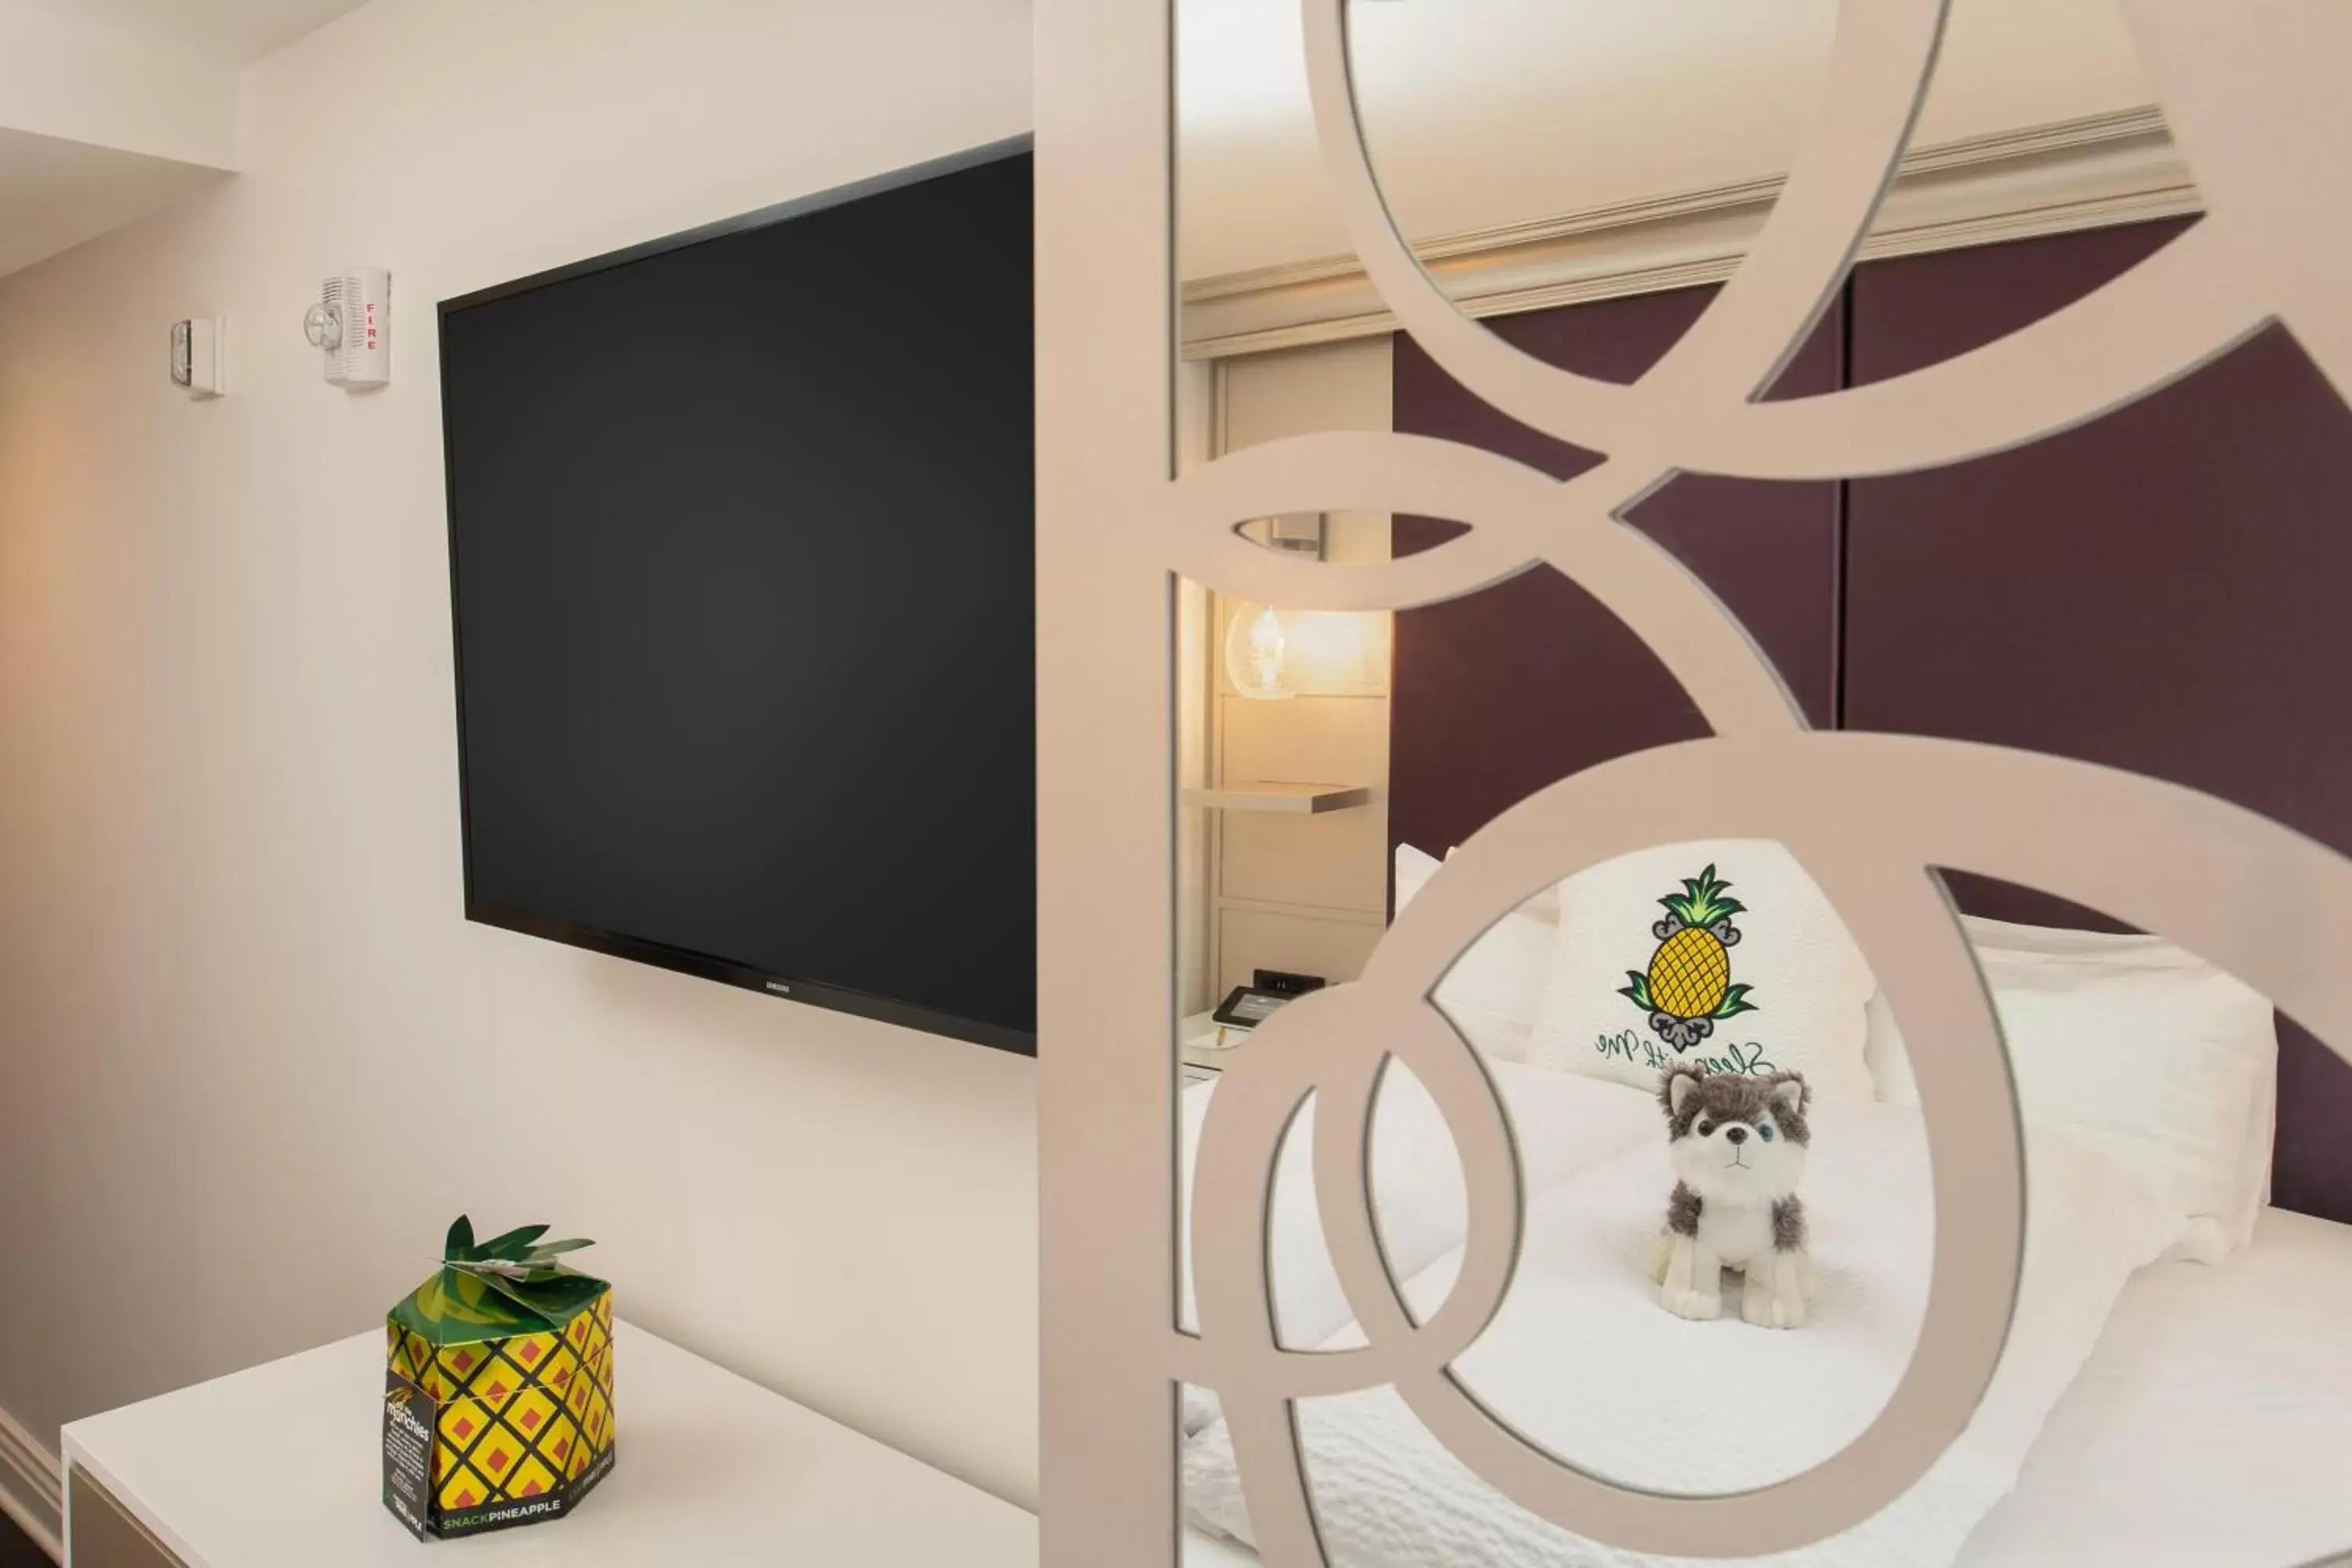 TV and multimedia, TV/Entertainment Center in Staypineapple, An Artful Hotel, Midtown New York